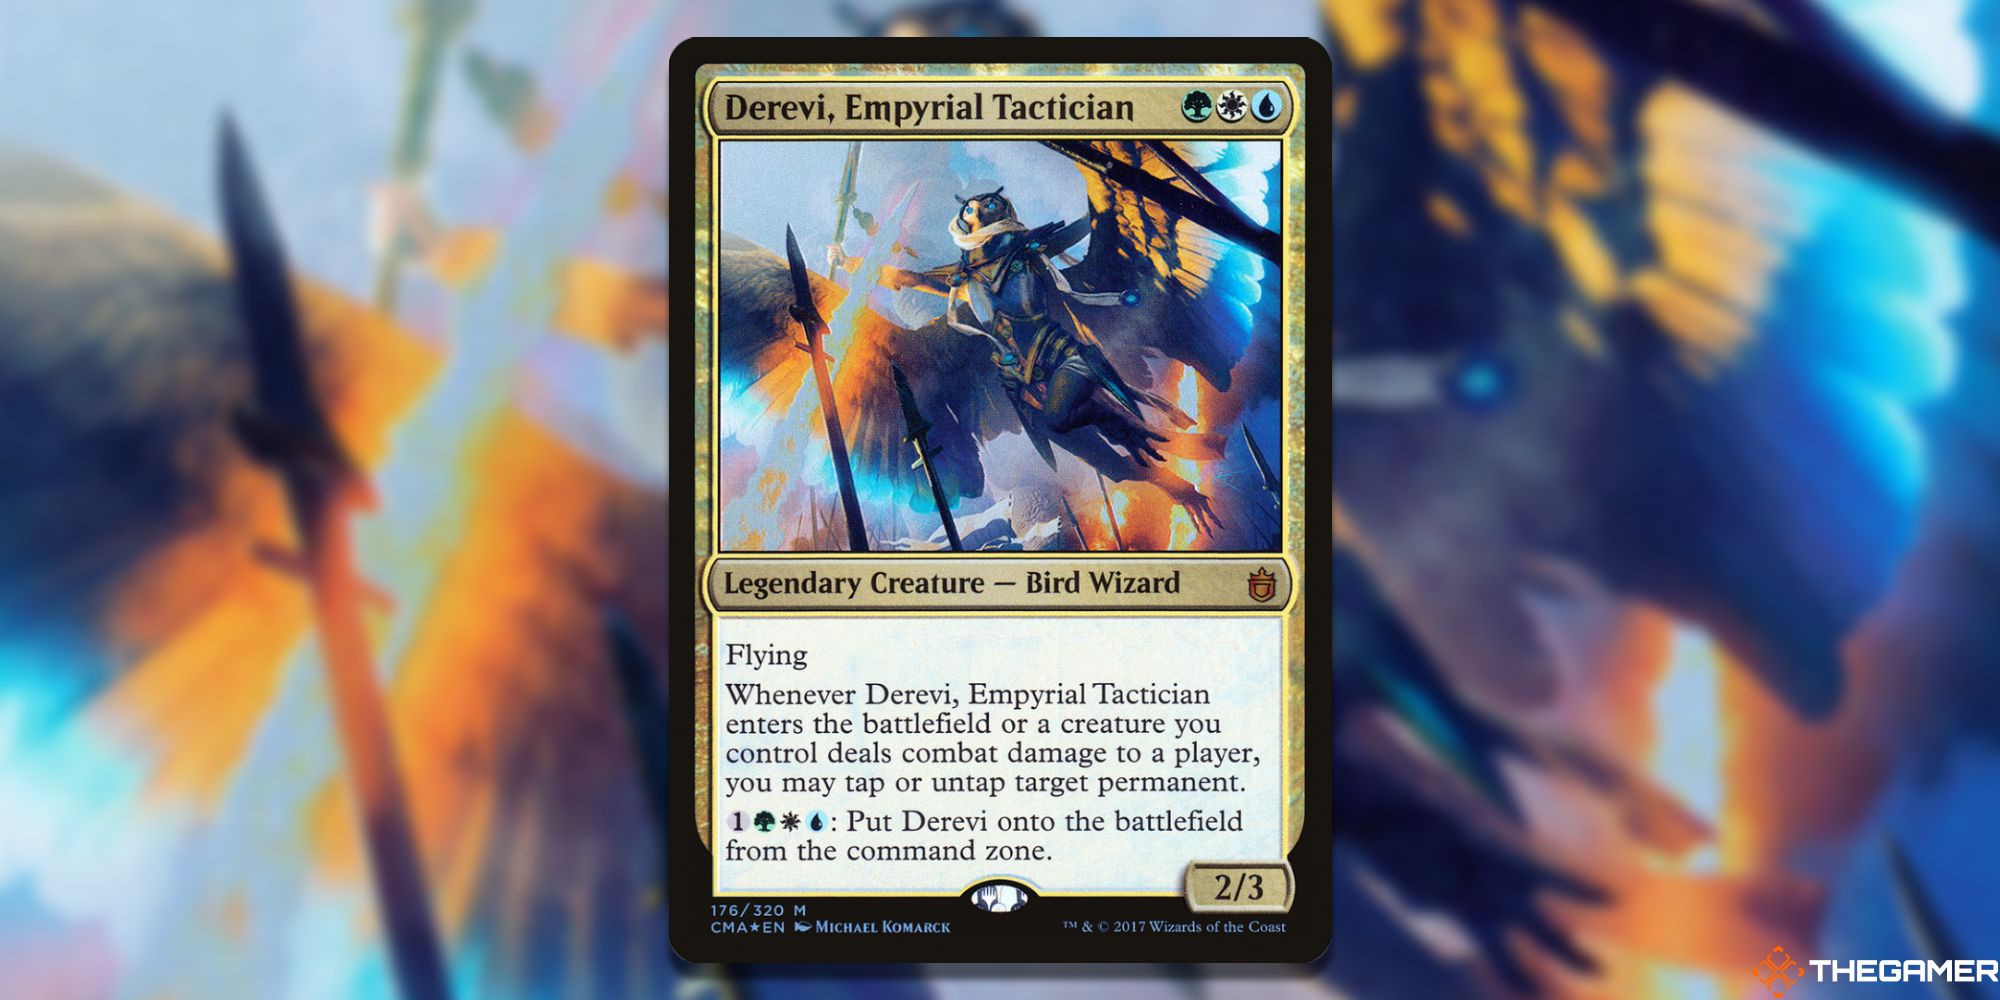 Image of the Derevi, Empyrial Tactician card in Magic: The Gathering, with artwork by Michael Komarck